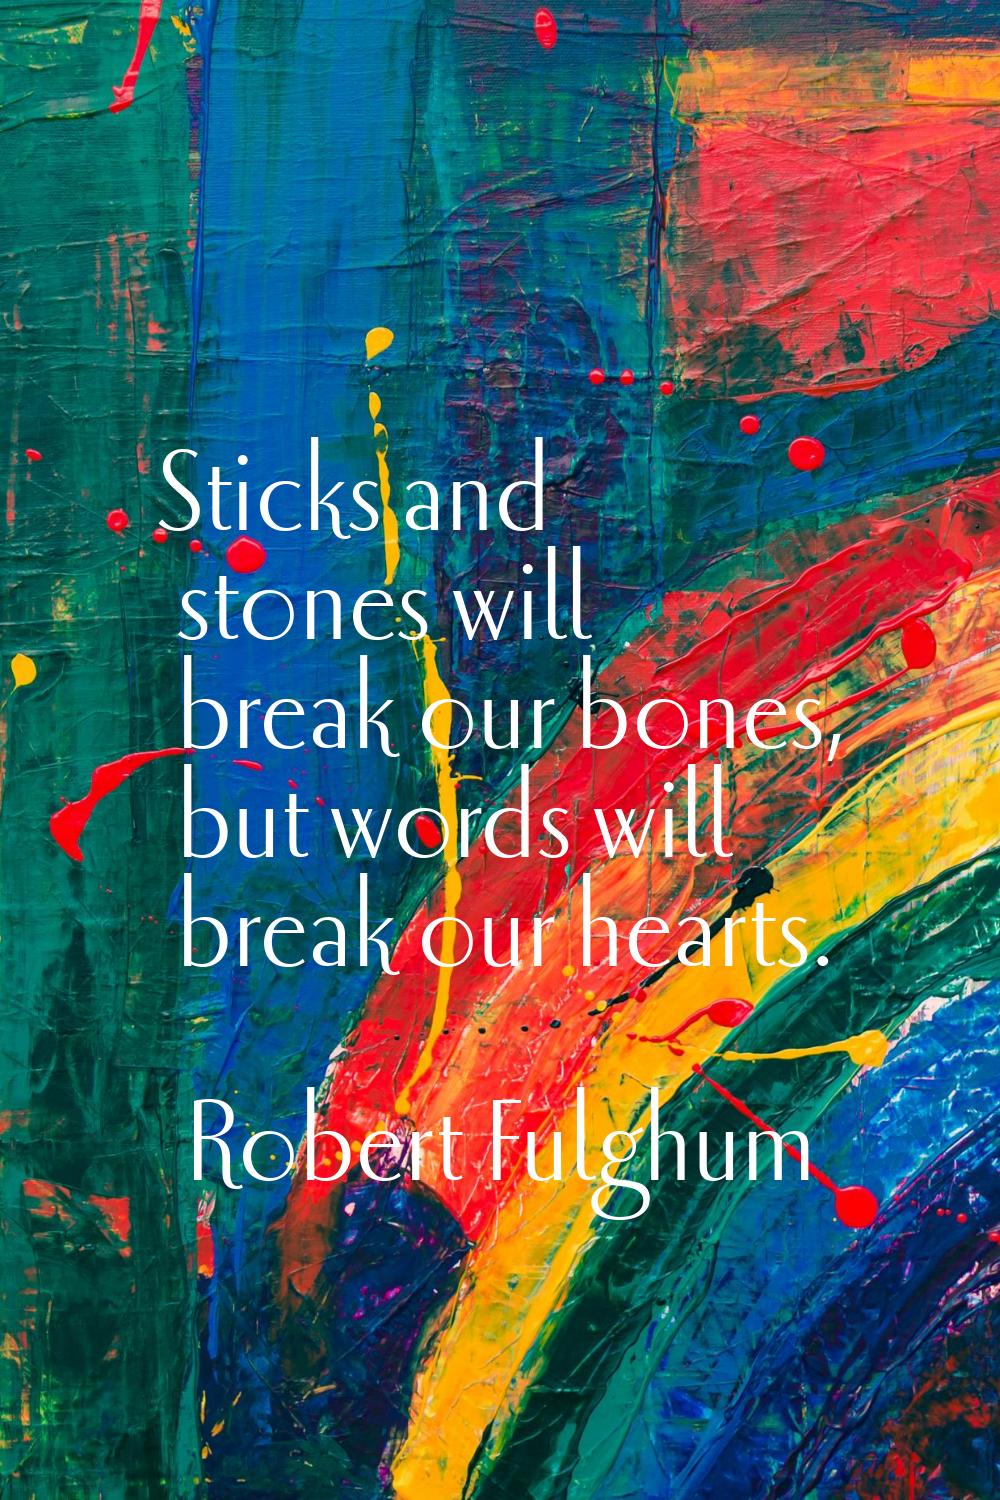 Sticks and stones will break our bones, but words will break our hearts.